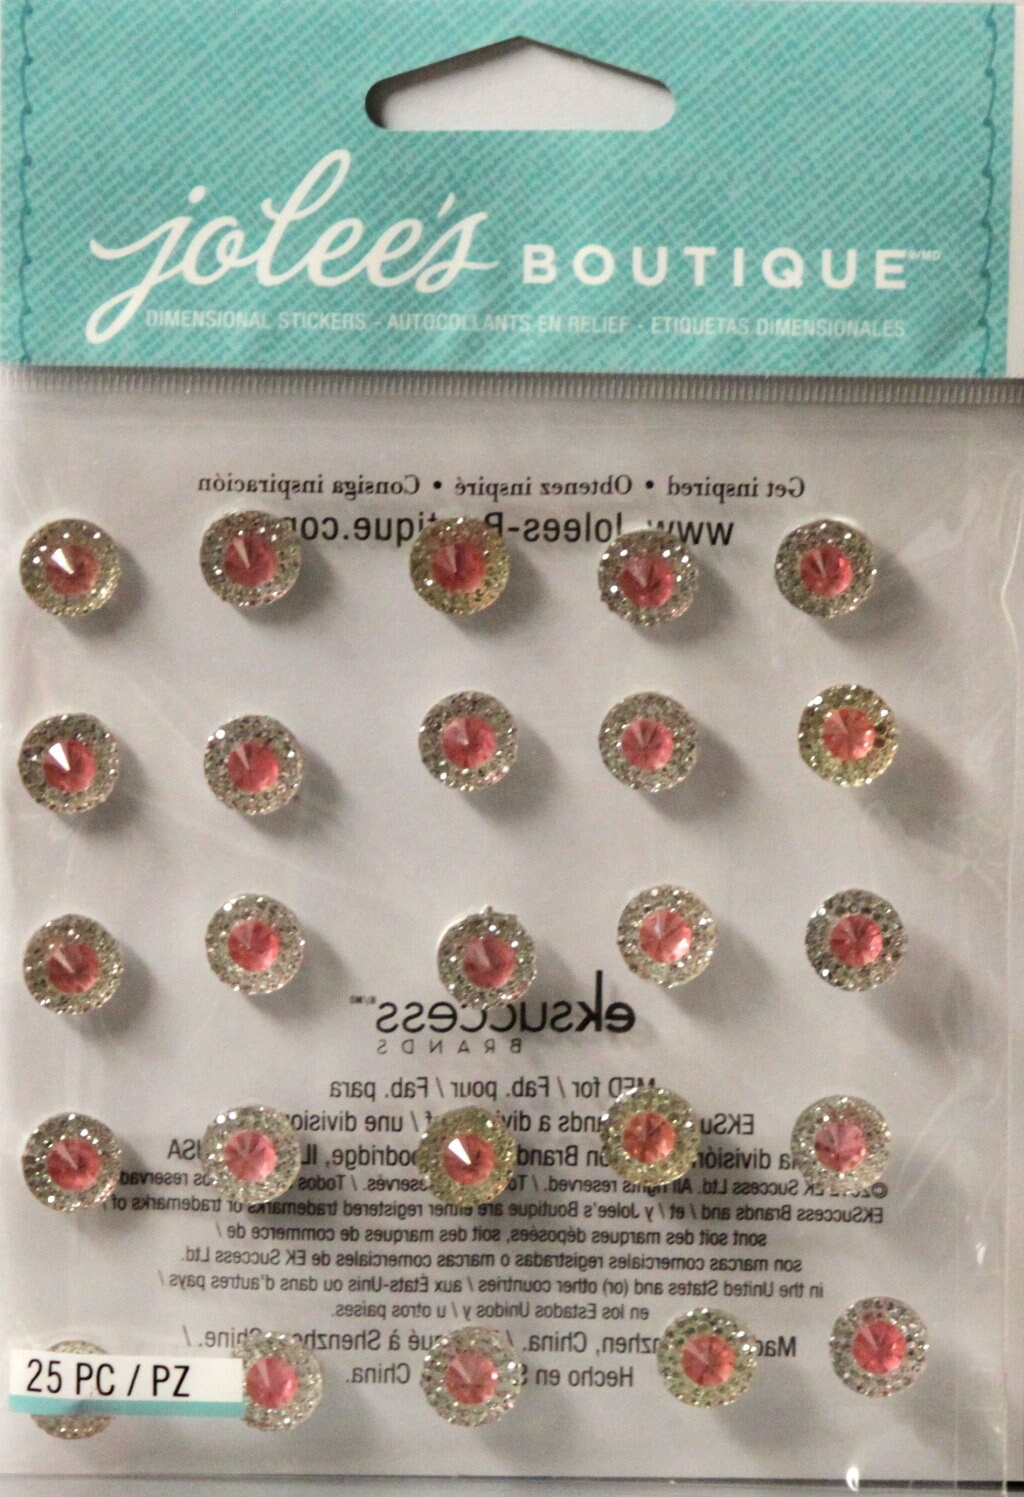 Jolee&#x27;s Boutique Bling Dual Tone Prizm Spinel Adhesive Dimensional Stickers